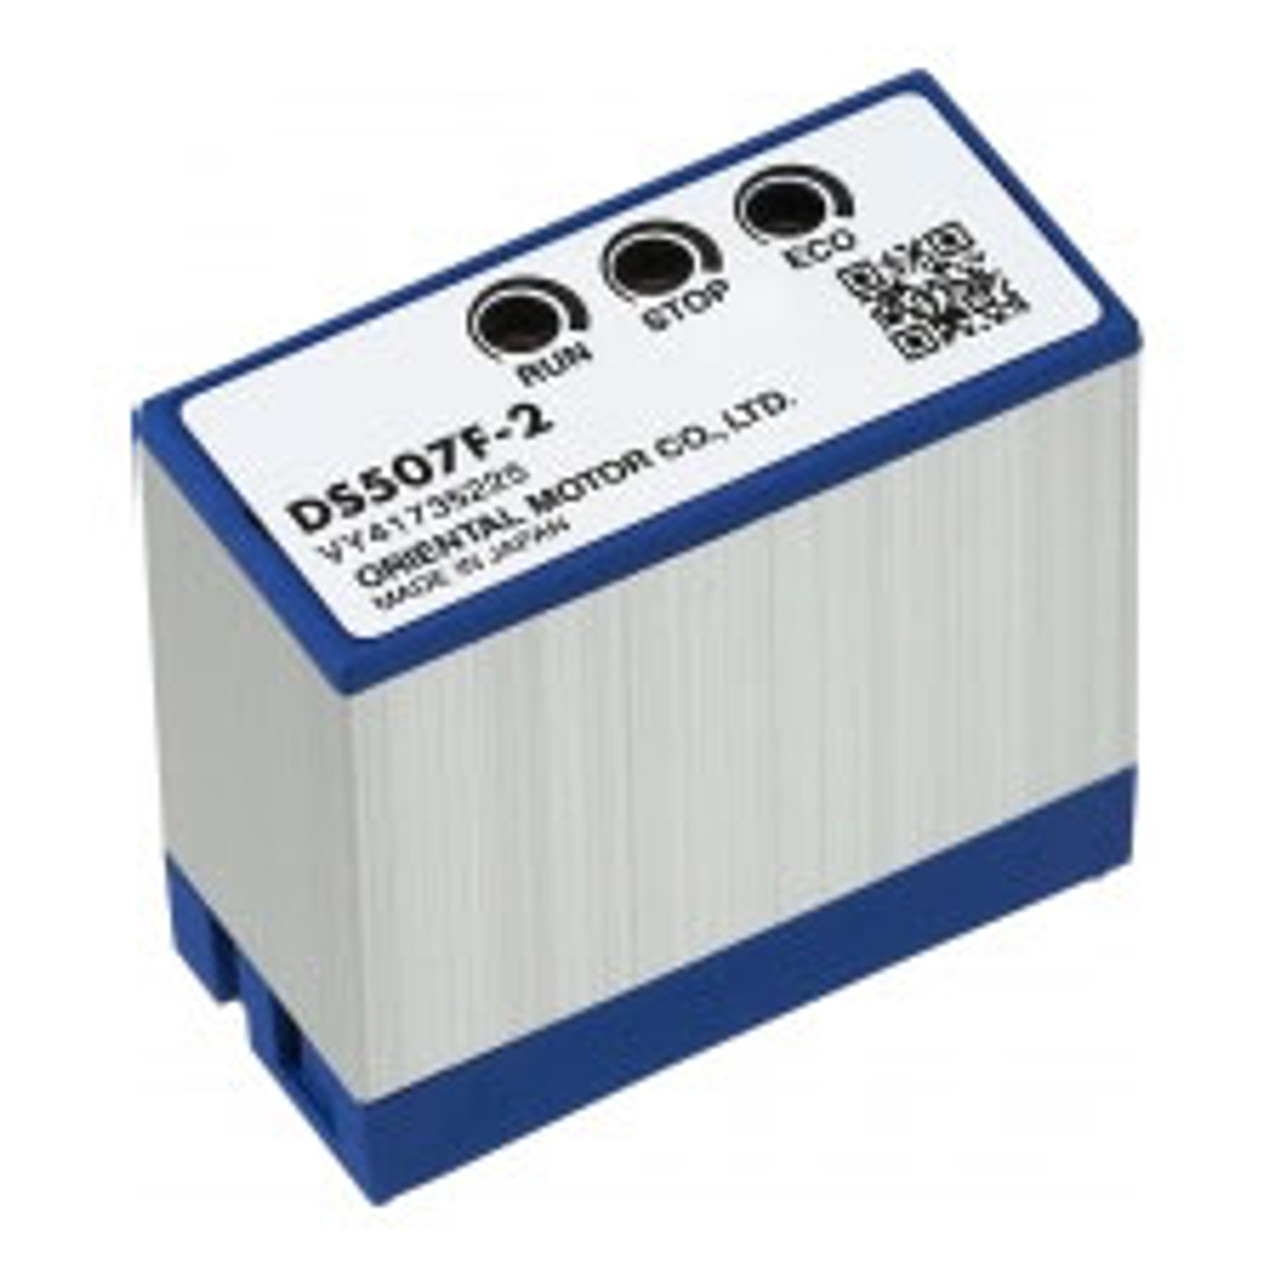 DS507HF-2 - Product Image